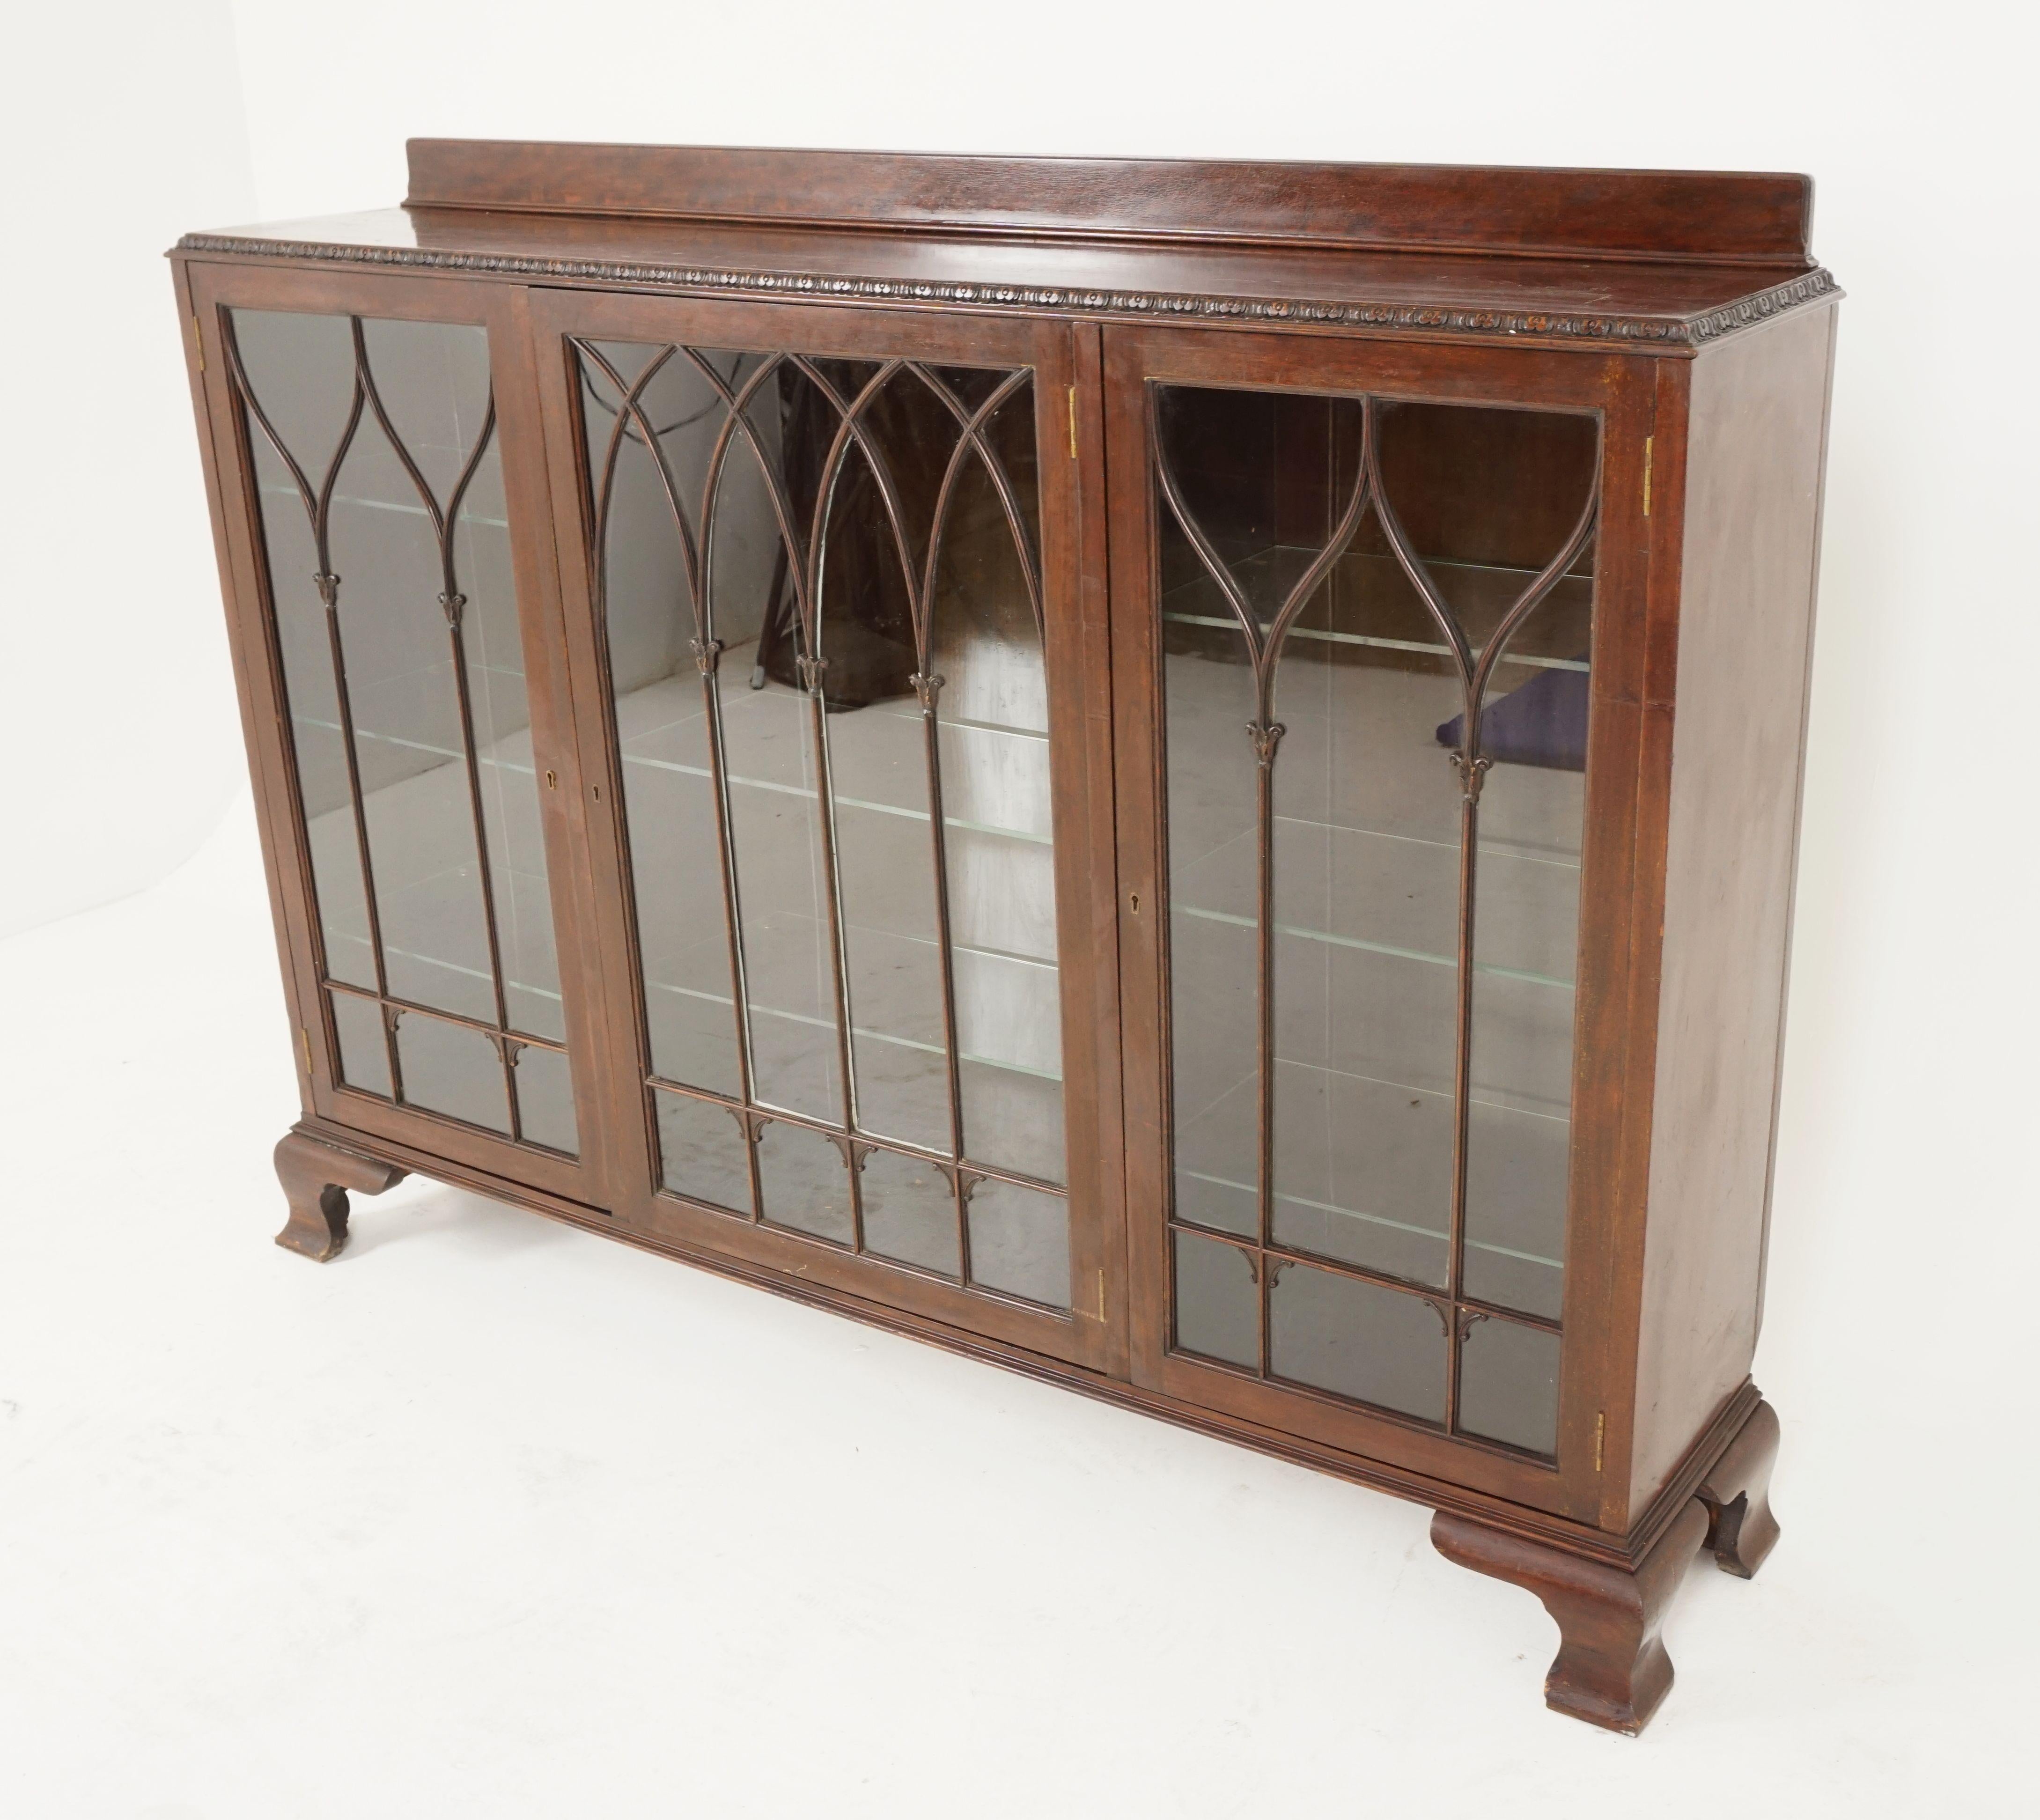 Antique Walnut bookcase, three door display cabinet, Scotland 1920, B2442

Scotland 1920
Solid Walnut
Original finish
Rectangular moulded top
Shaped pediment on the back
Carved frieze on the front and sides
Large center door with gothic shaped